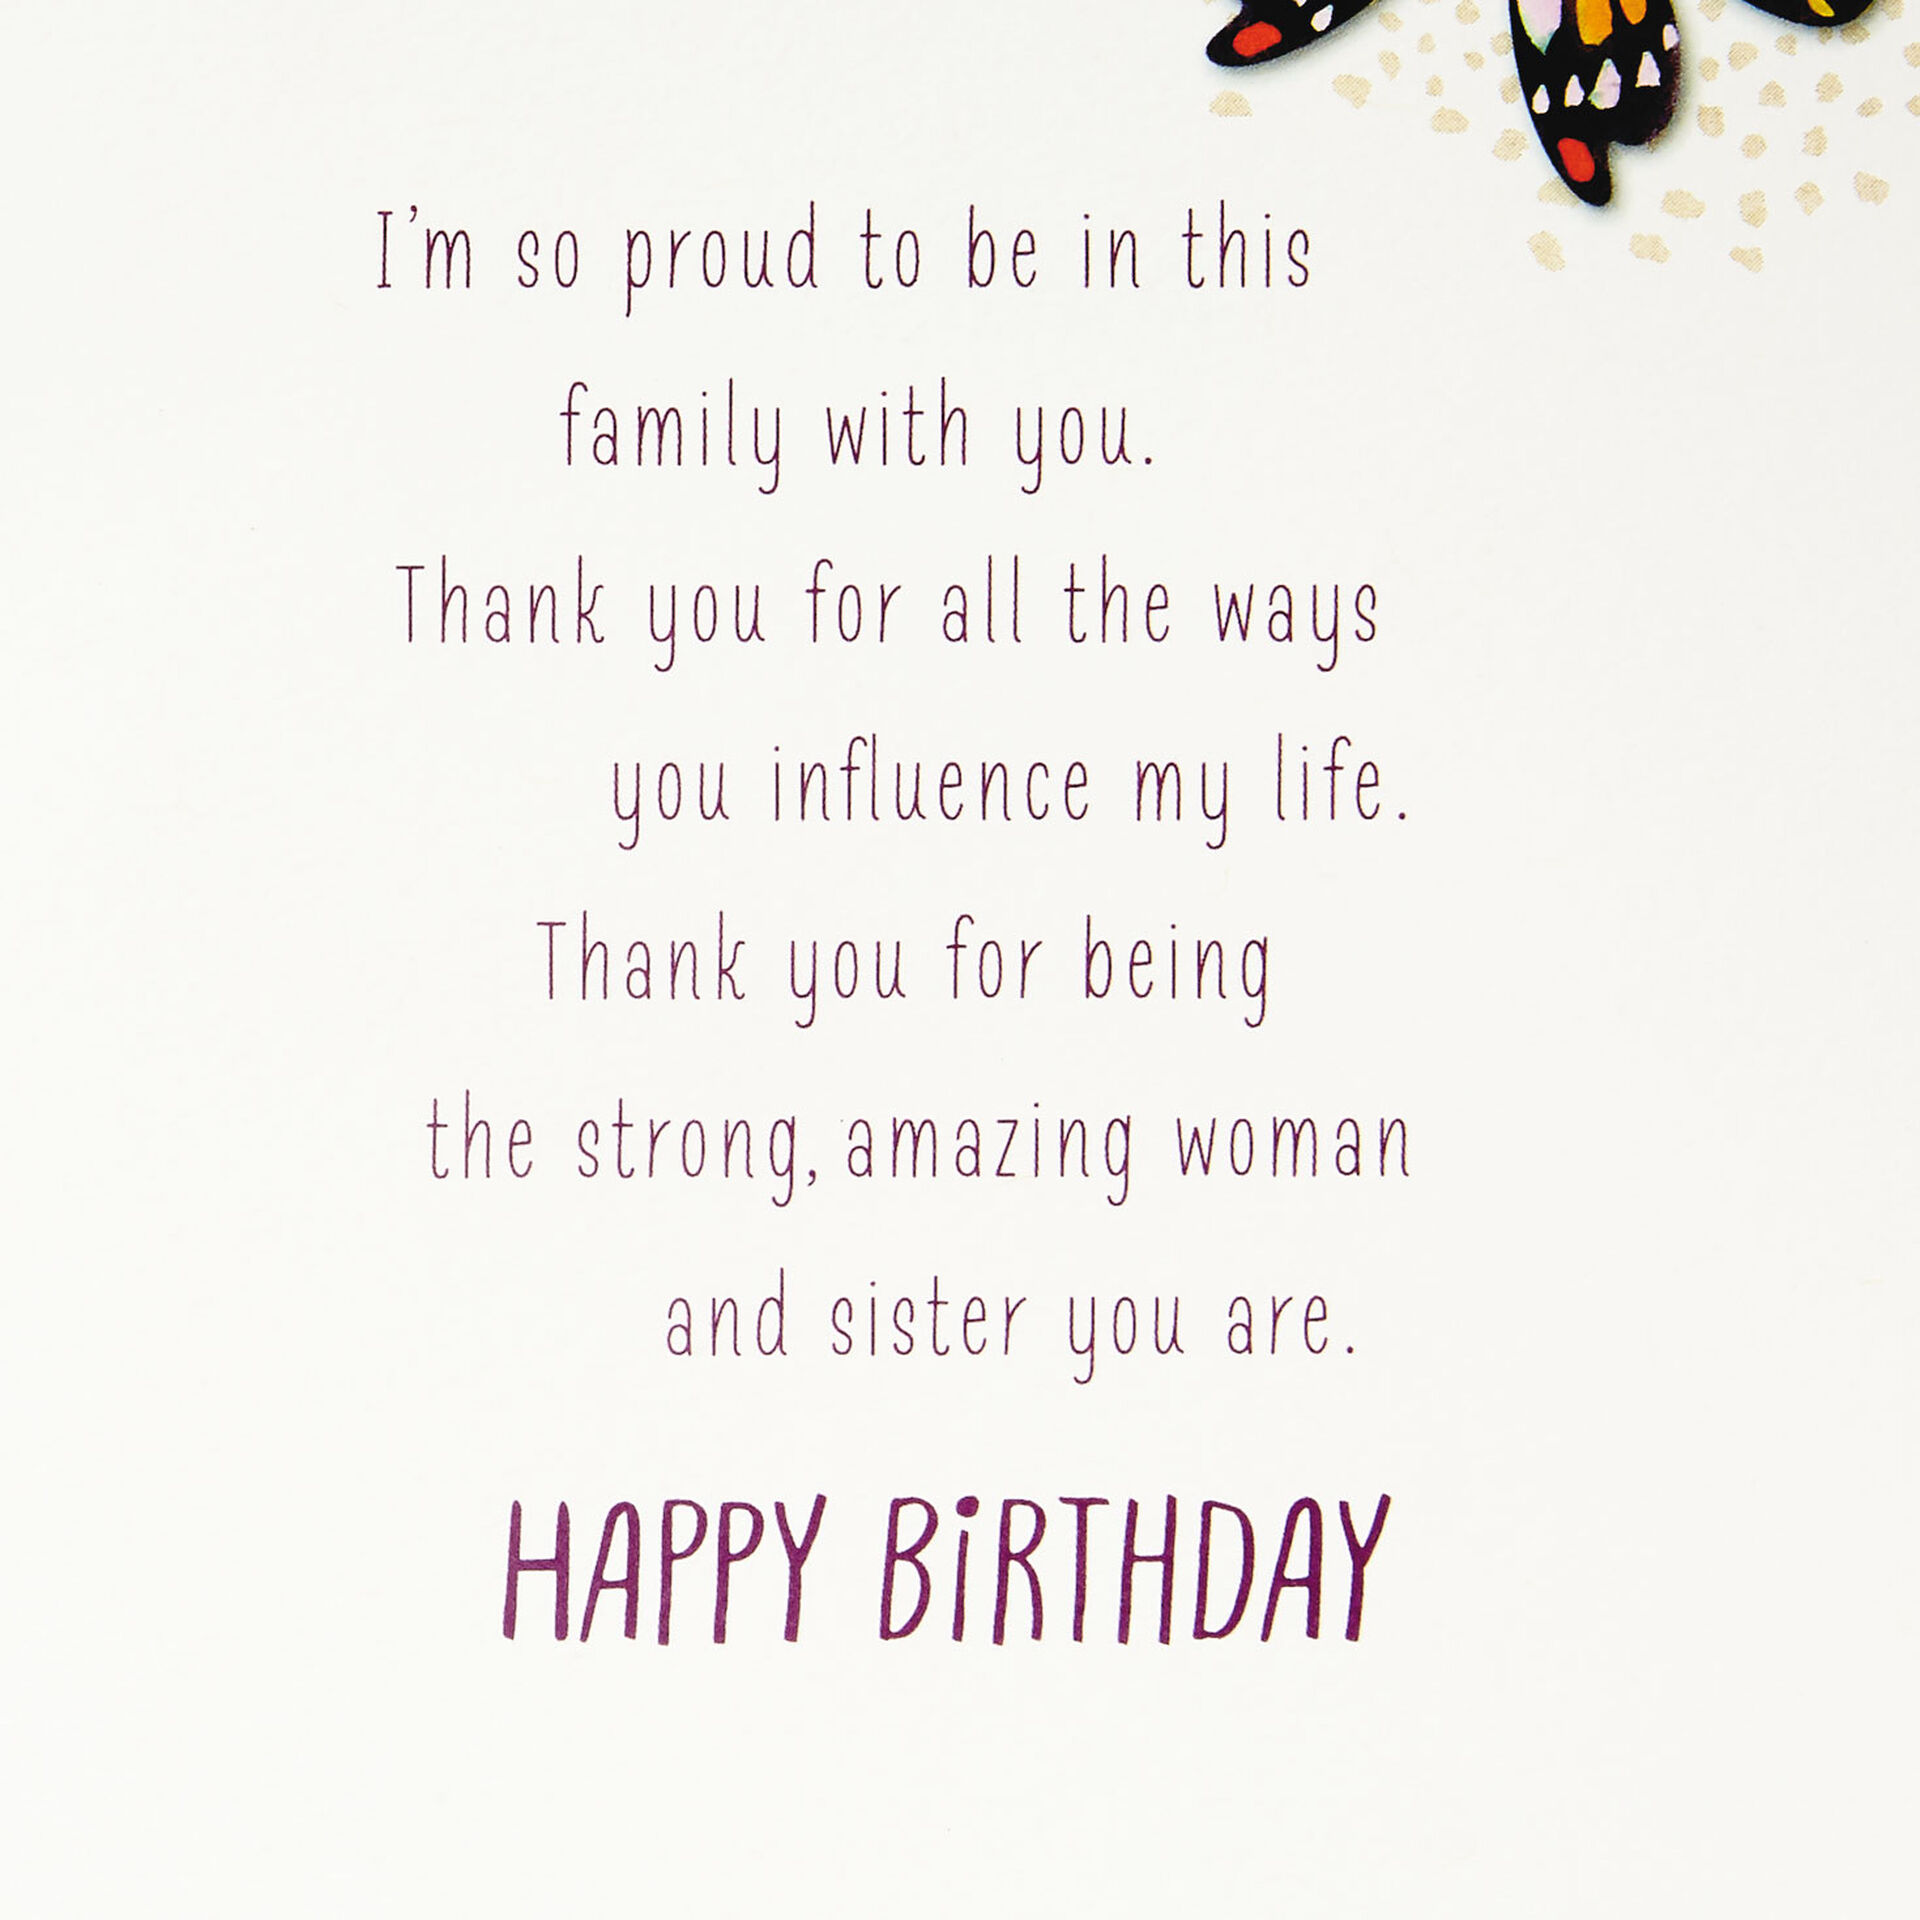 Butterflies-and-Gems-Birthday-Card-for-Sister_759FBD4305_02